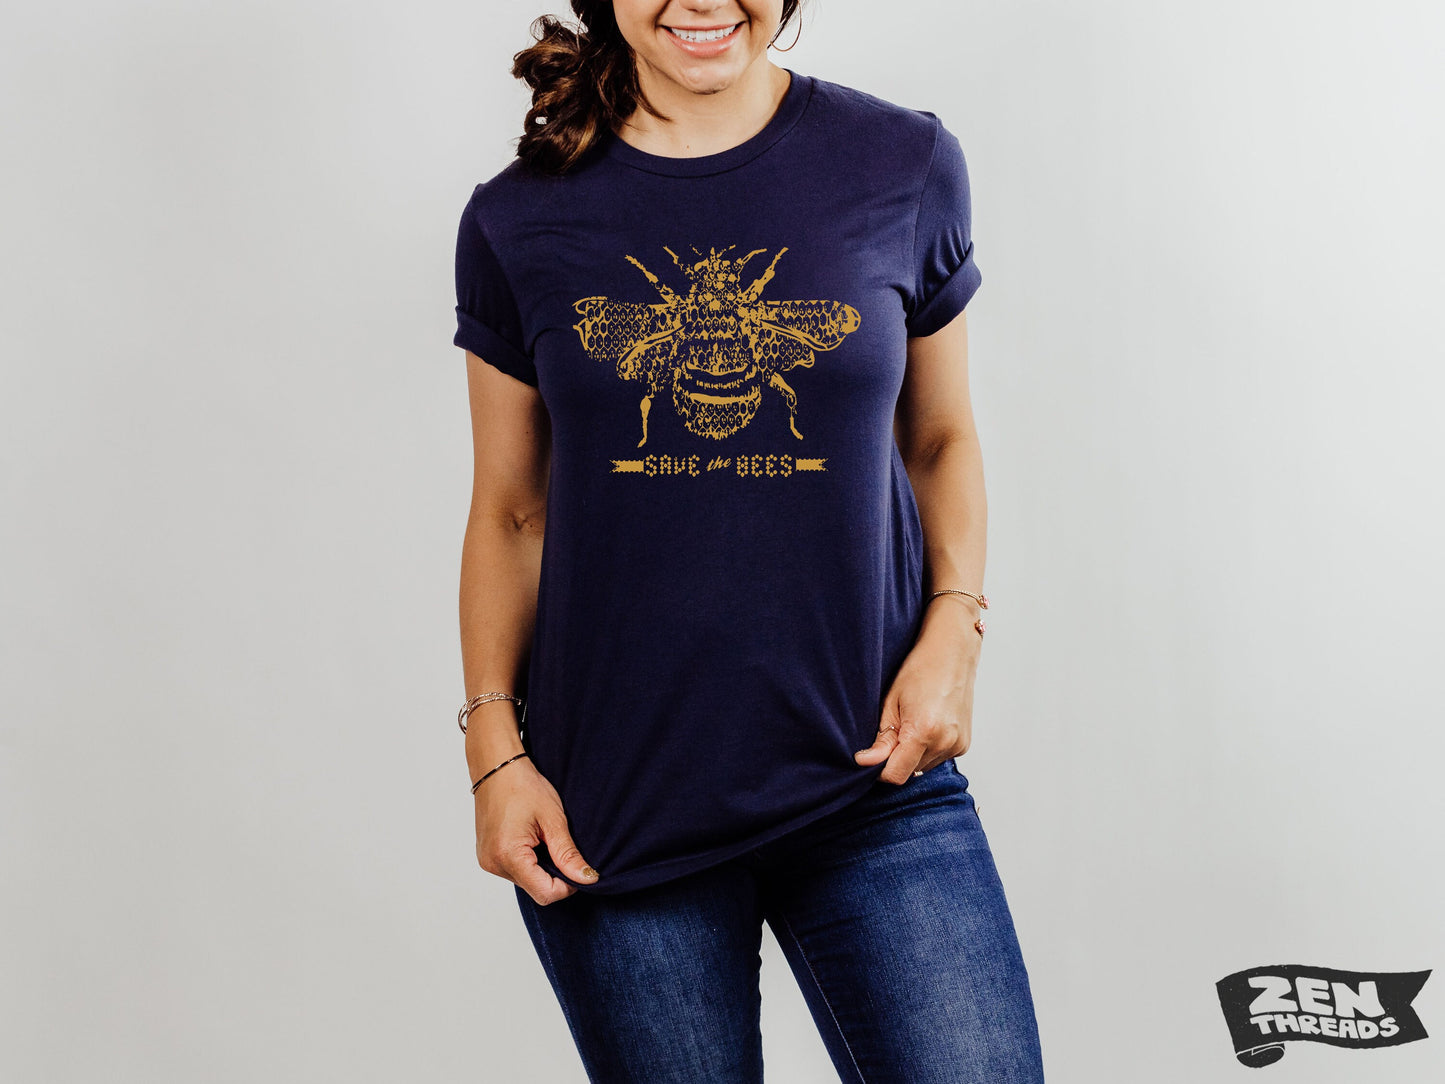 SAVE The BEES Unisex mens women's T Shirt custom color printed tee insect honey bee lover shirt garden gift